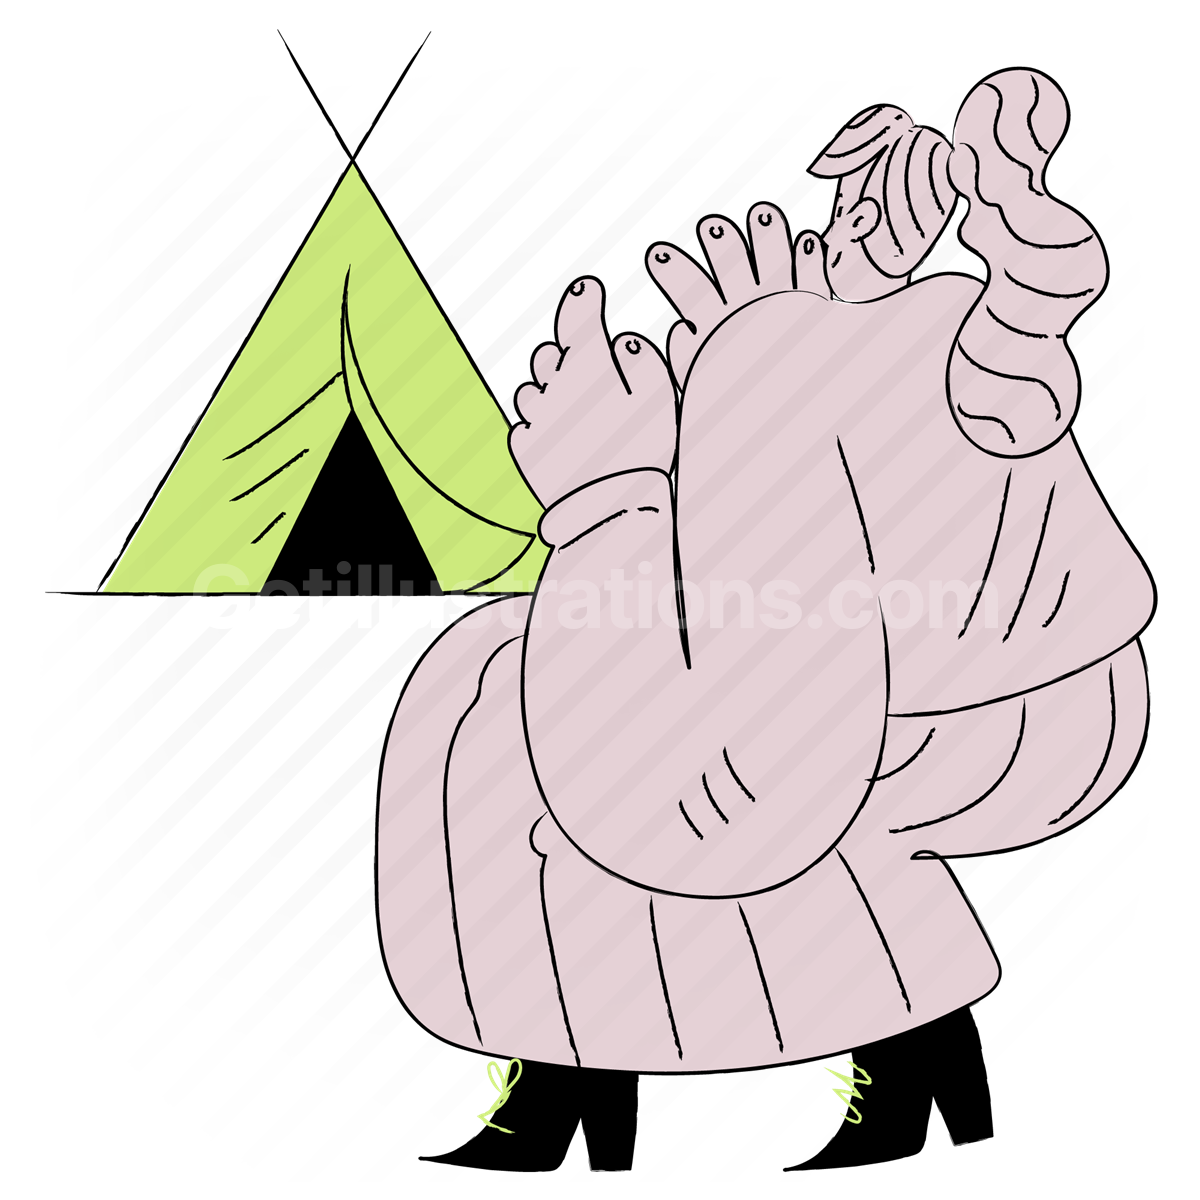 camp, camping, tent, outdoors, accommodation, woman, people